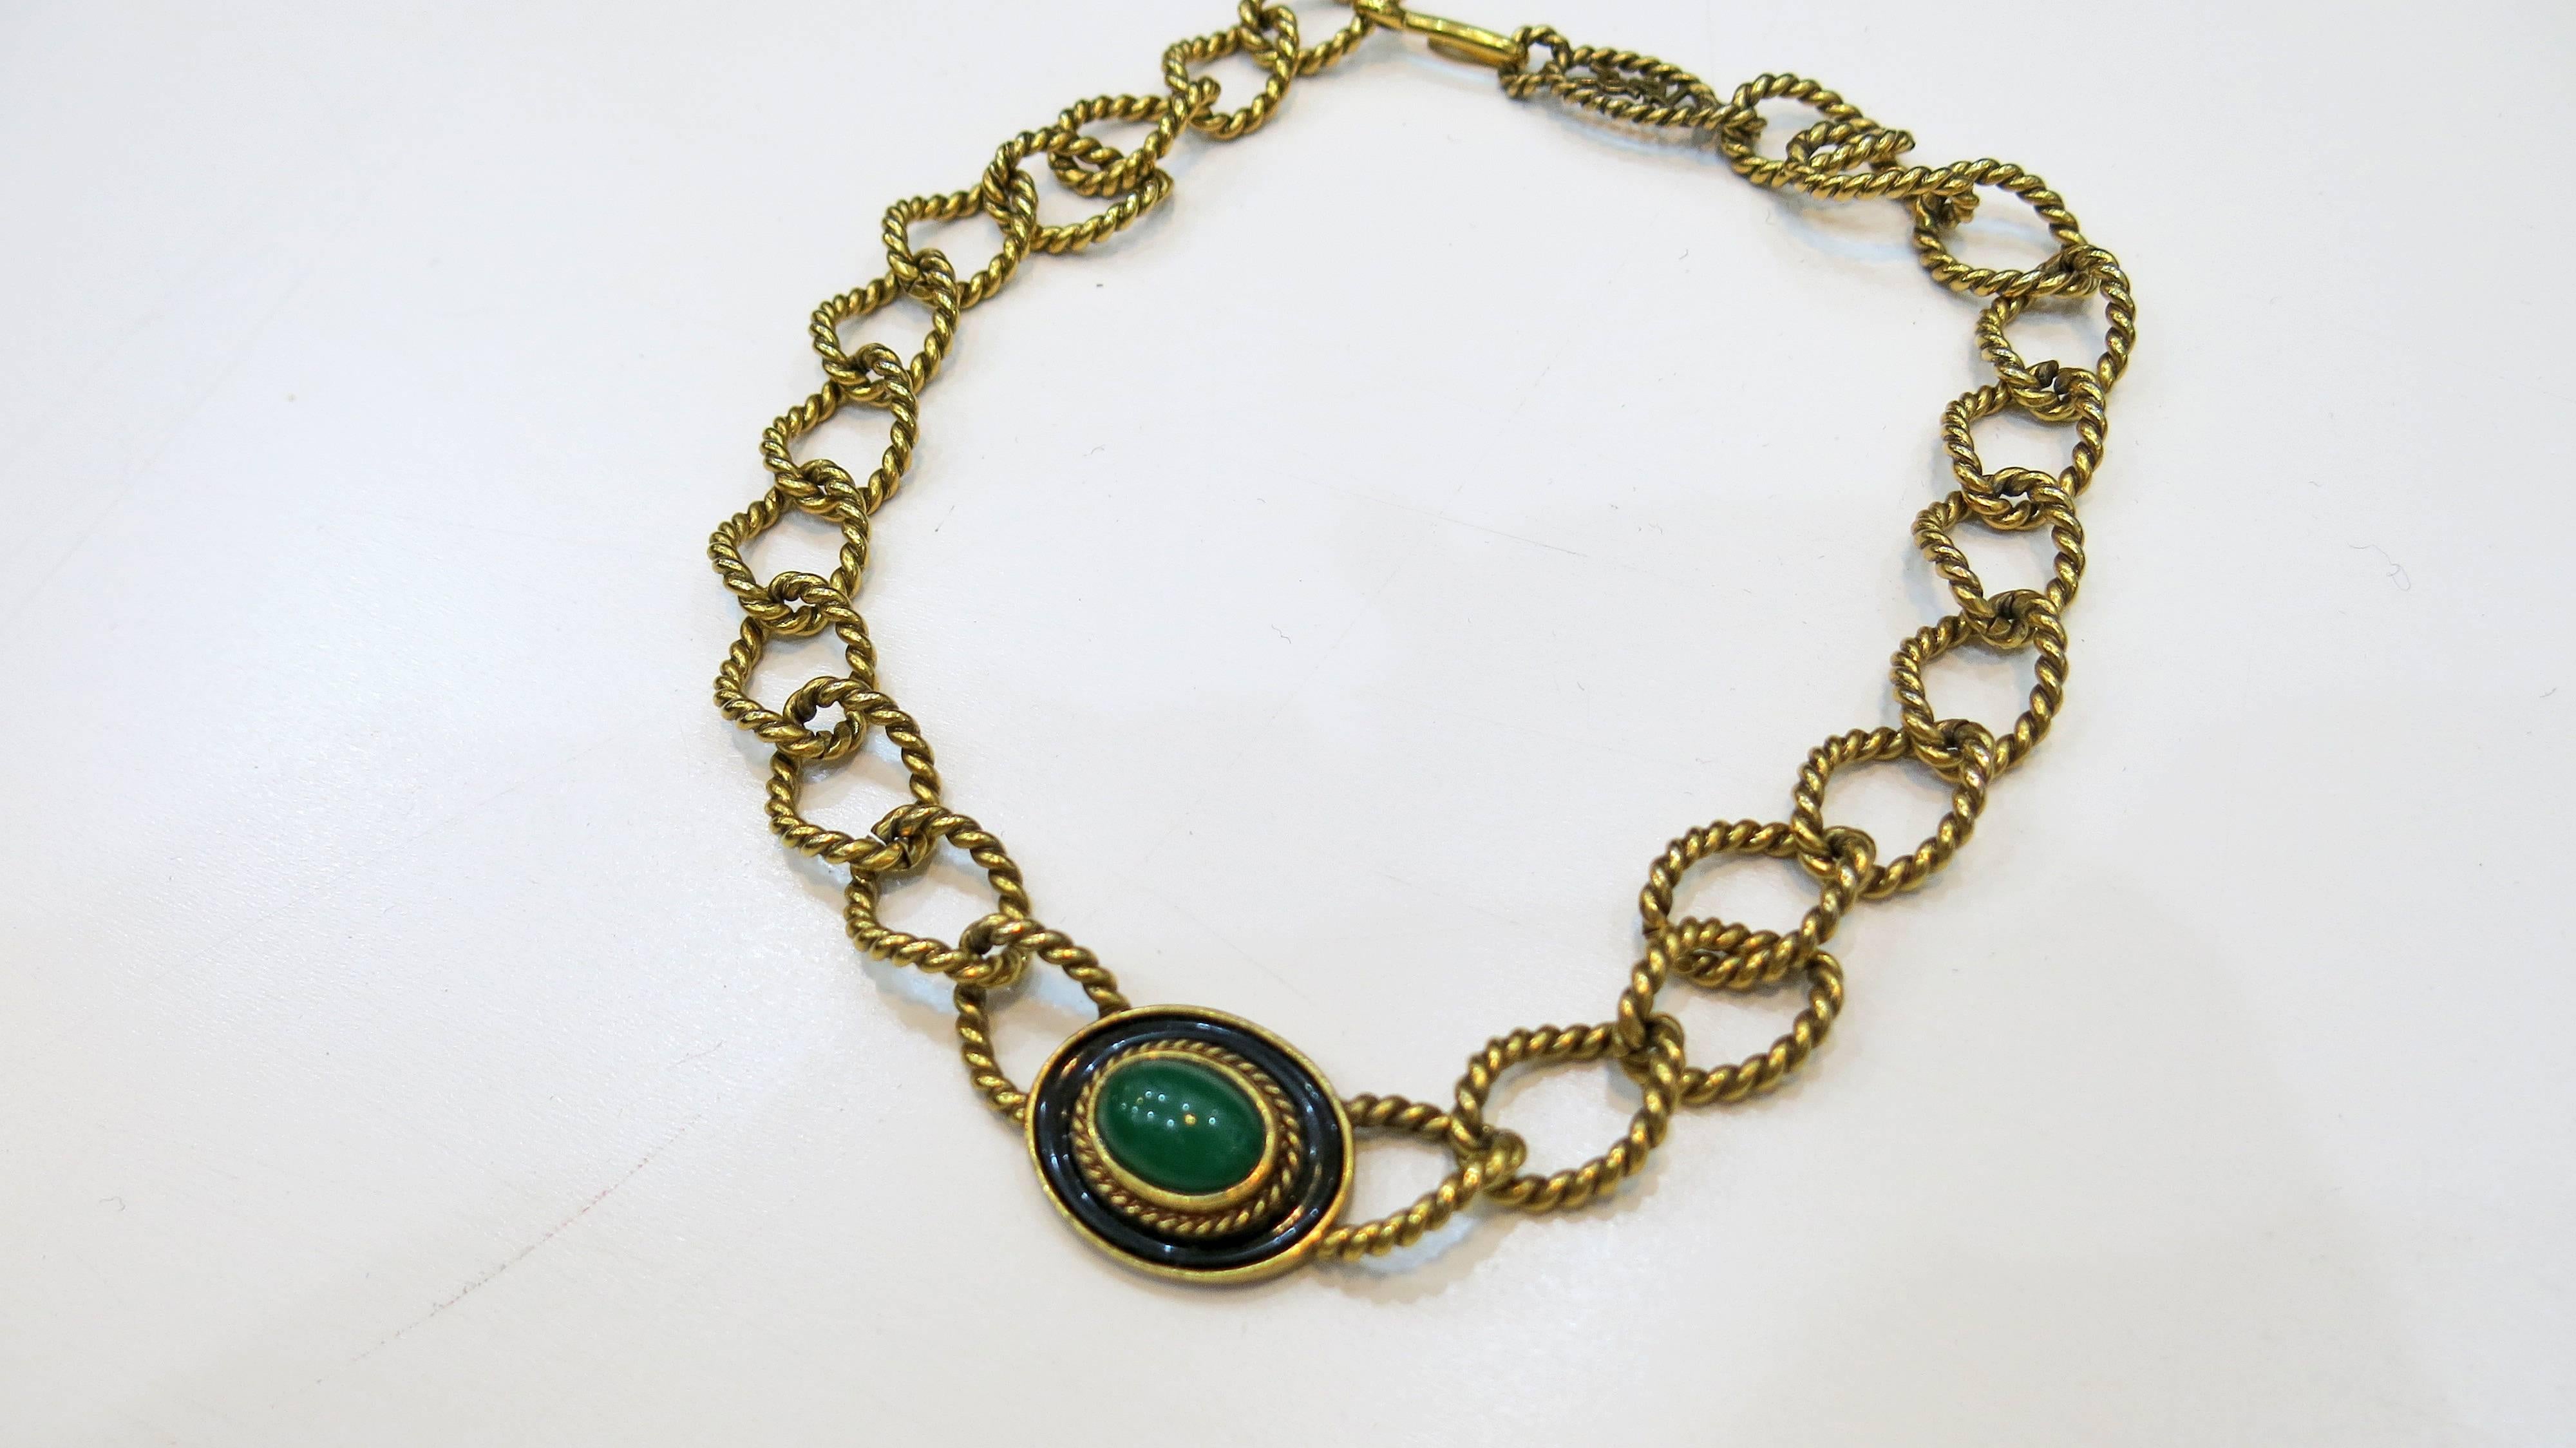 Braided brass chain with logo clasp and green glass cabochon inlaid in brass and surrounded by black enamel. Not quite a choker but hits close to the neck. 

Yves St. Laurent began as a designer making clothing for his mother and sisters. He won